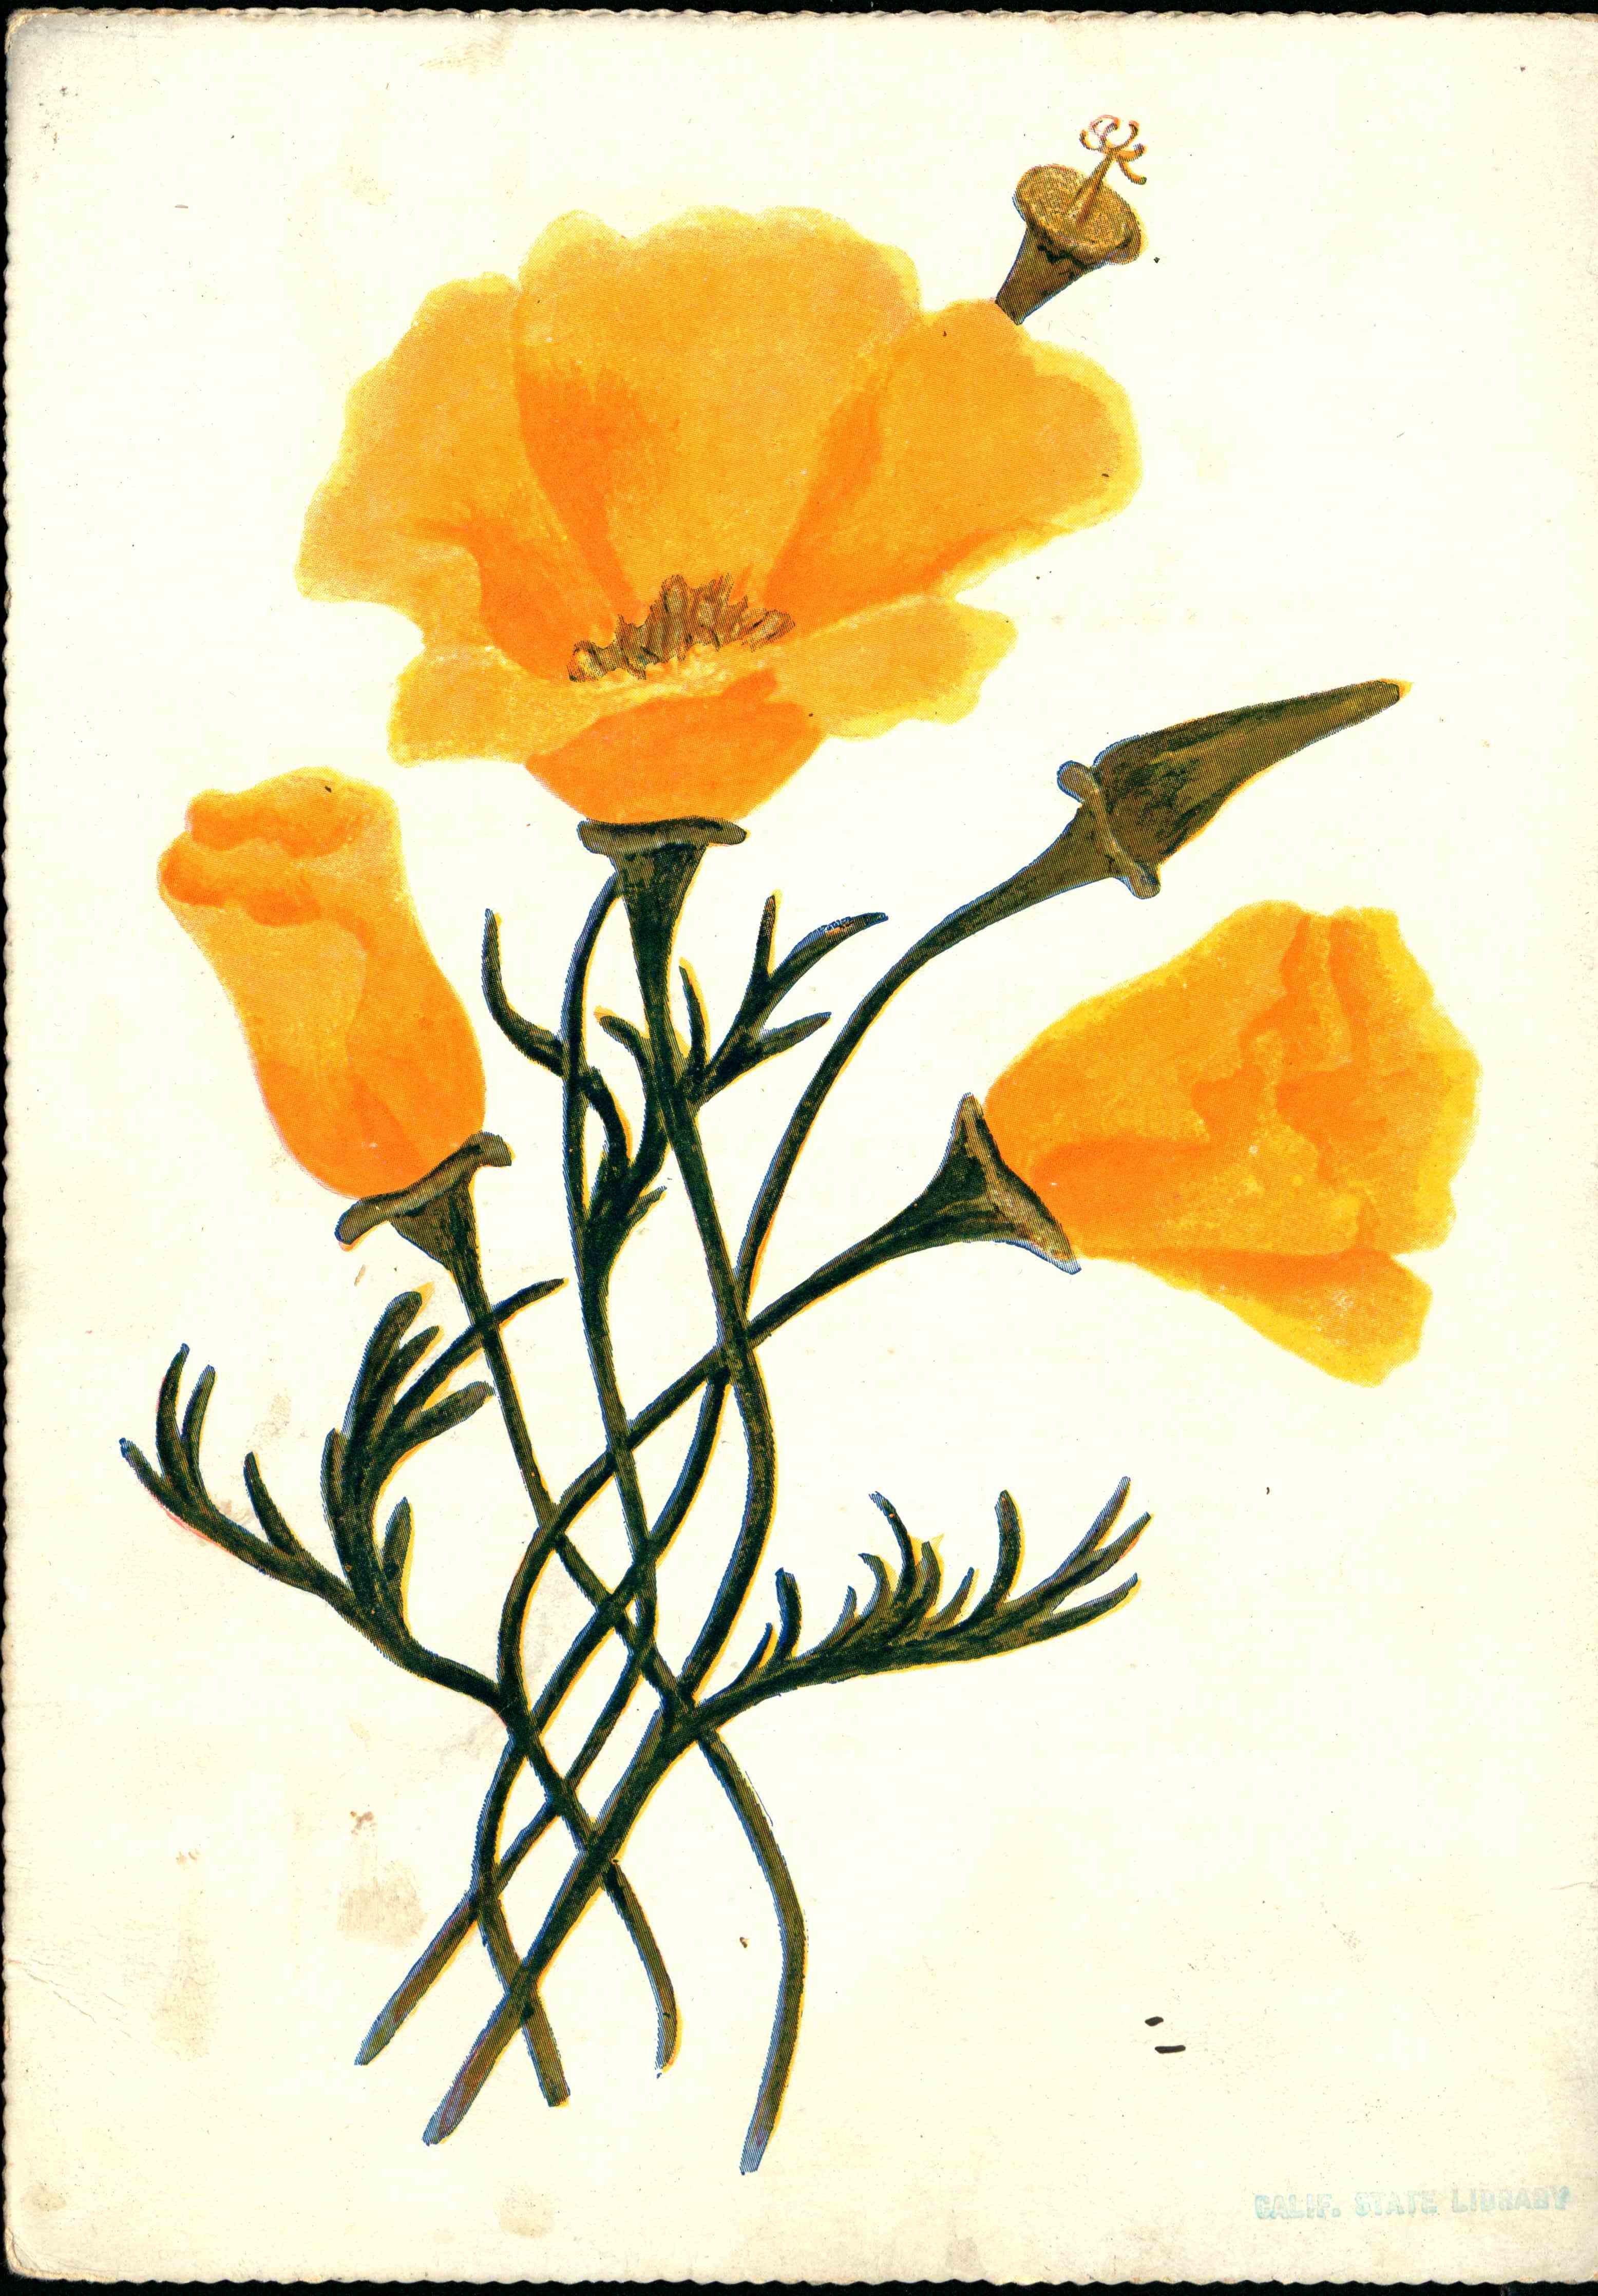 Poppy flower on the front of the menu